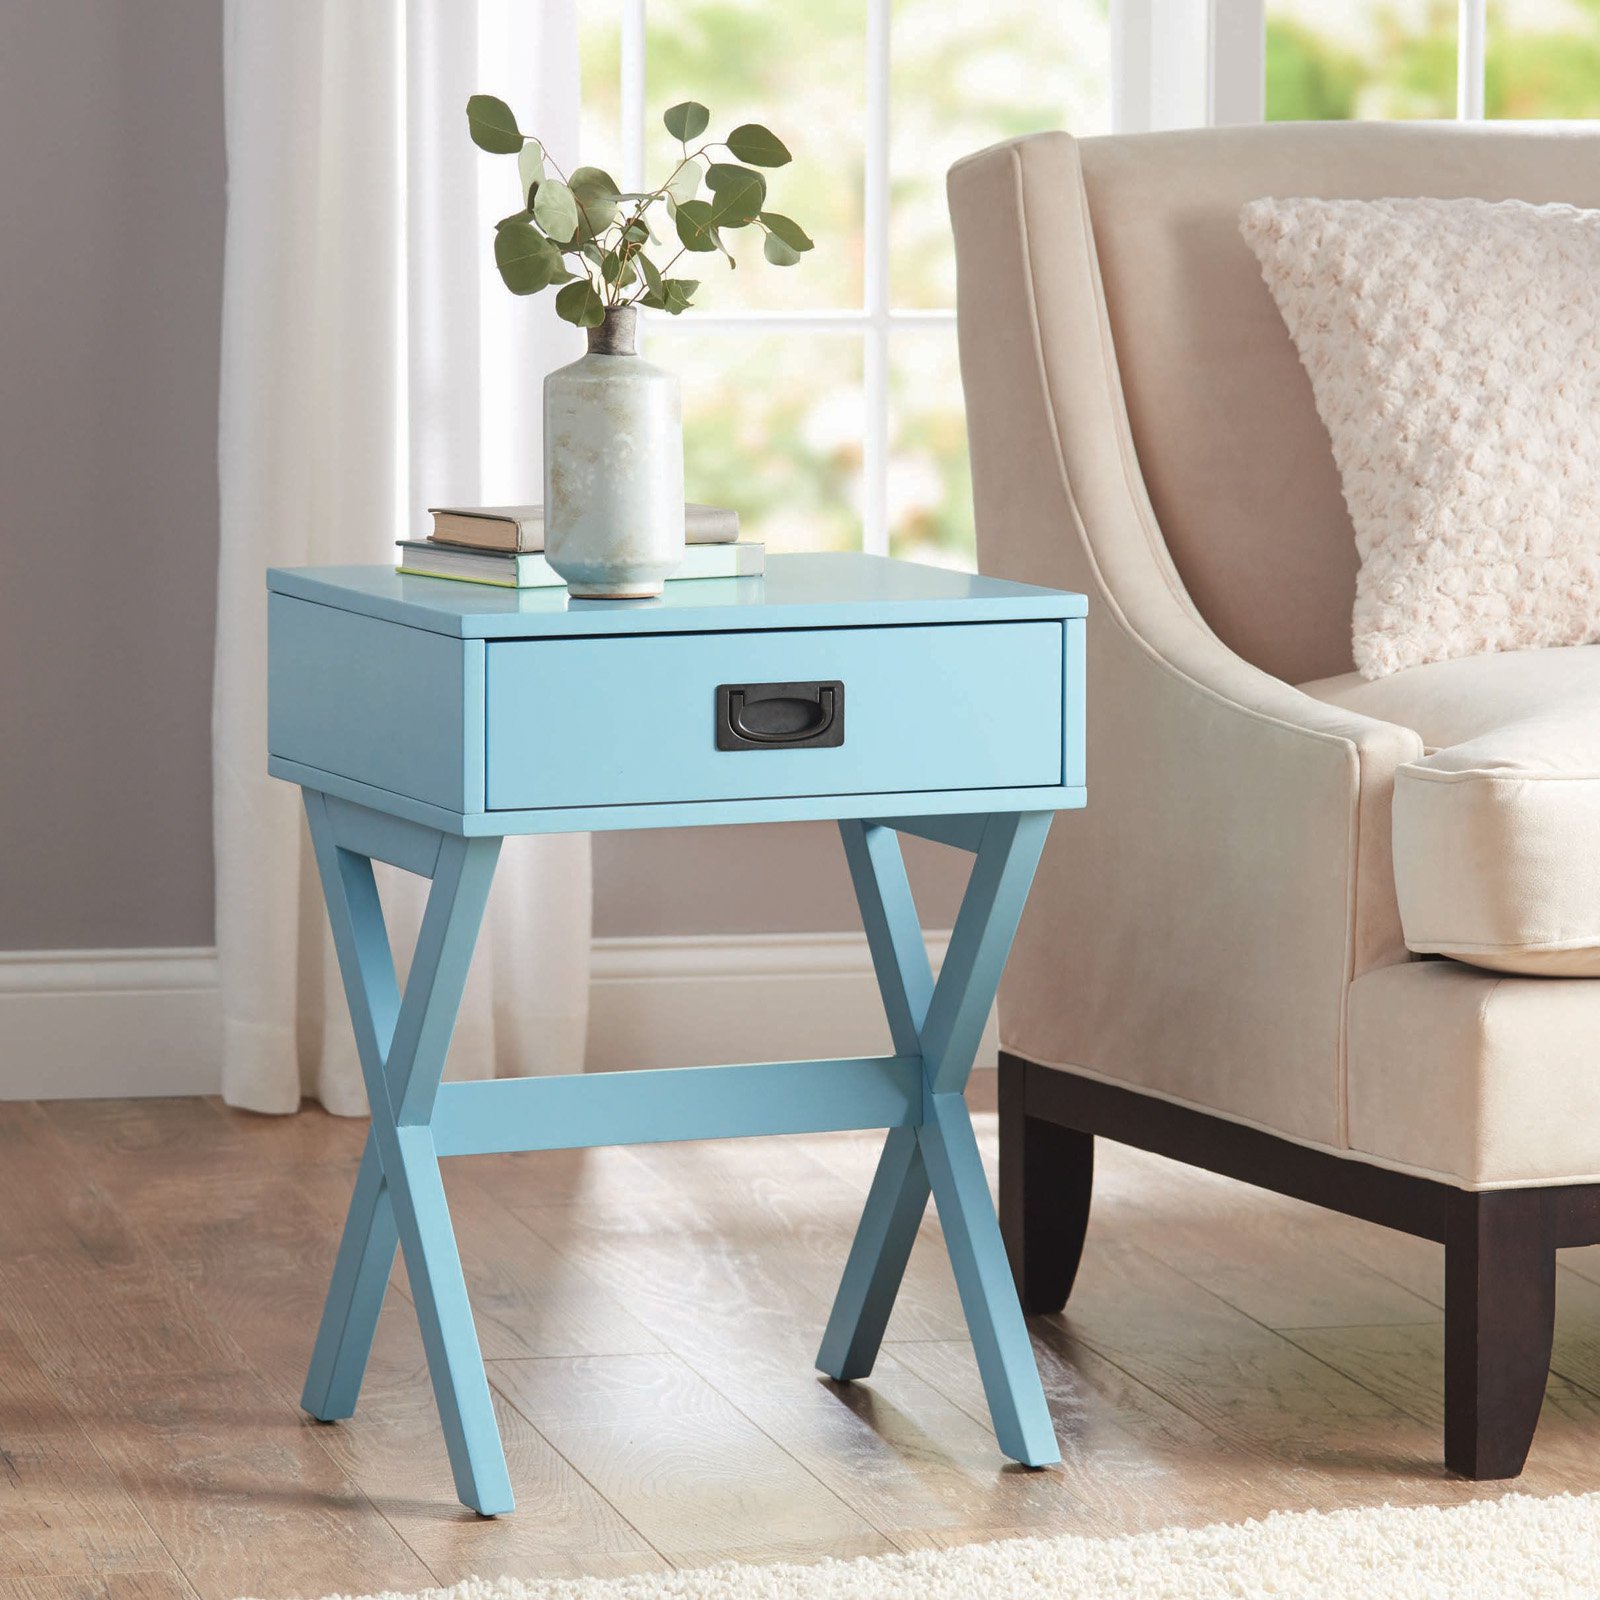 Better Homes & Gardens X-Leg Accent Table with Drawer, Multiple Colors - image 4 of 6